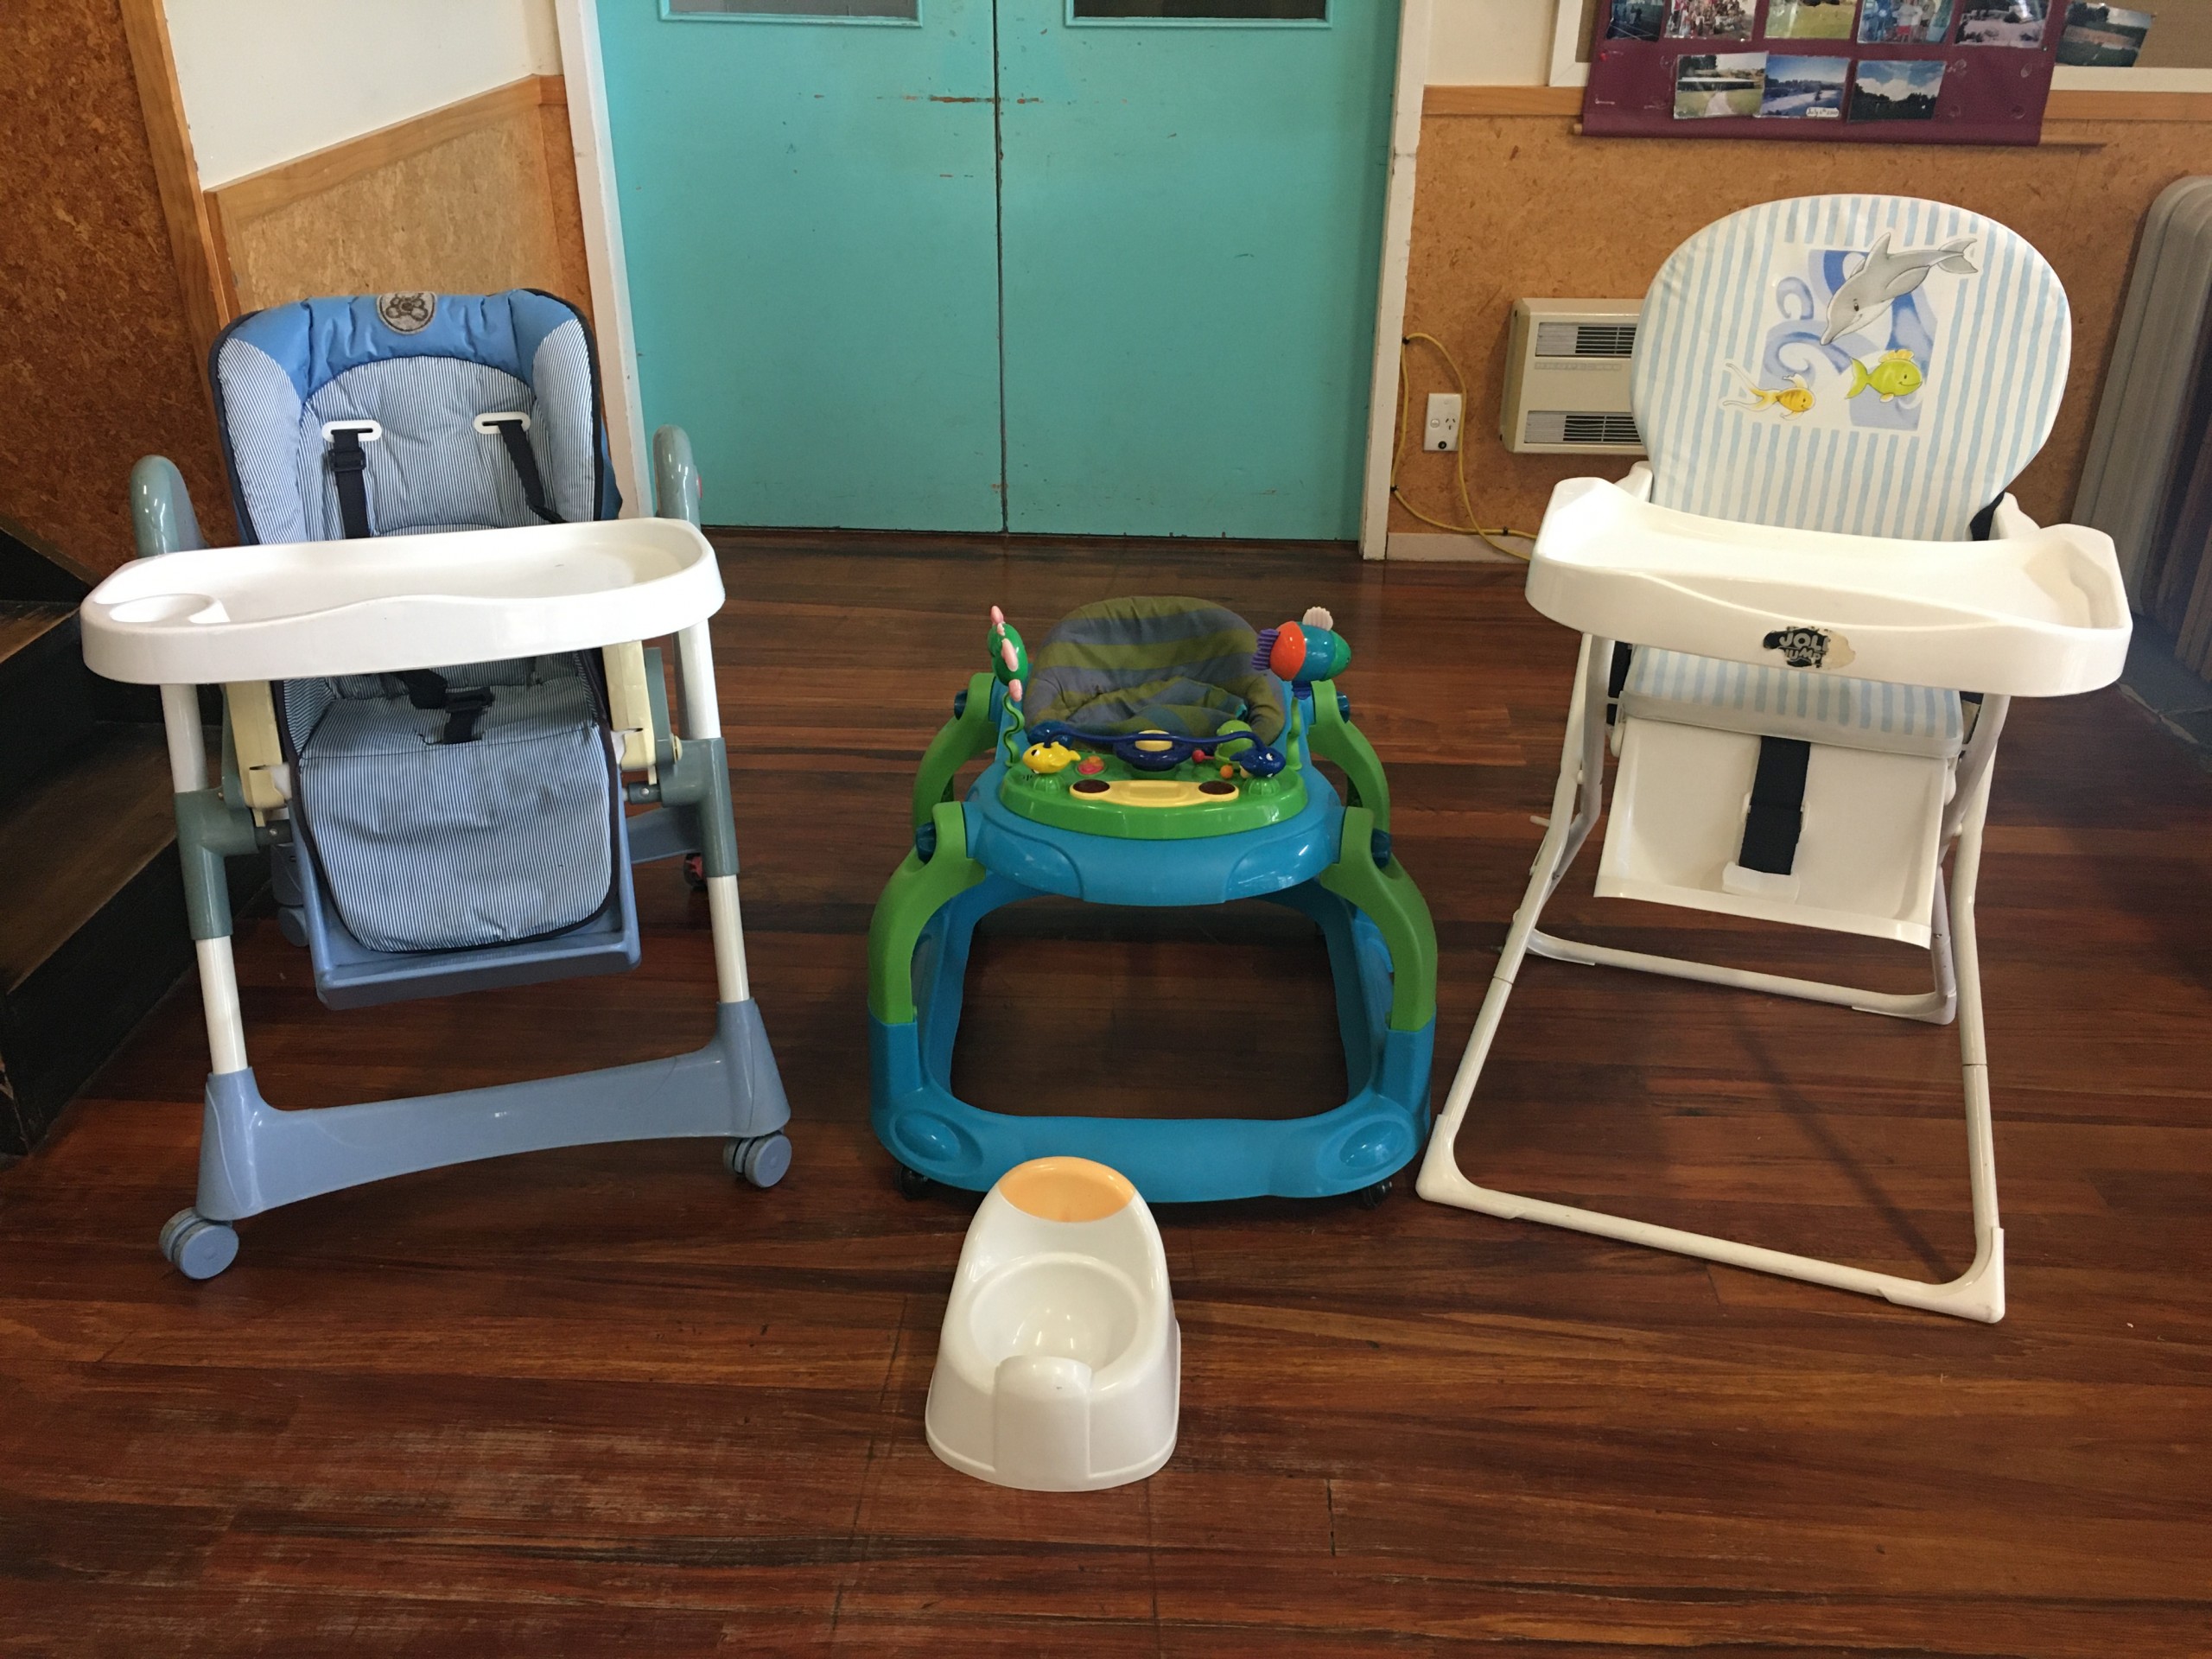 Facilities for toddlers